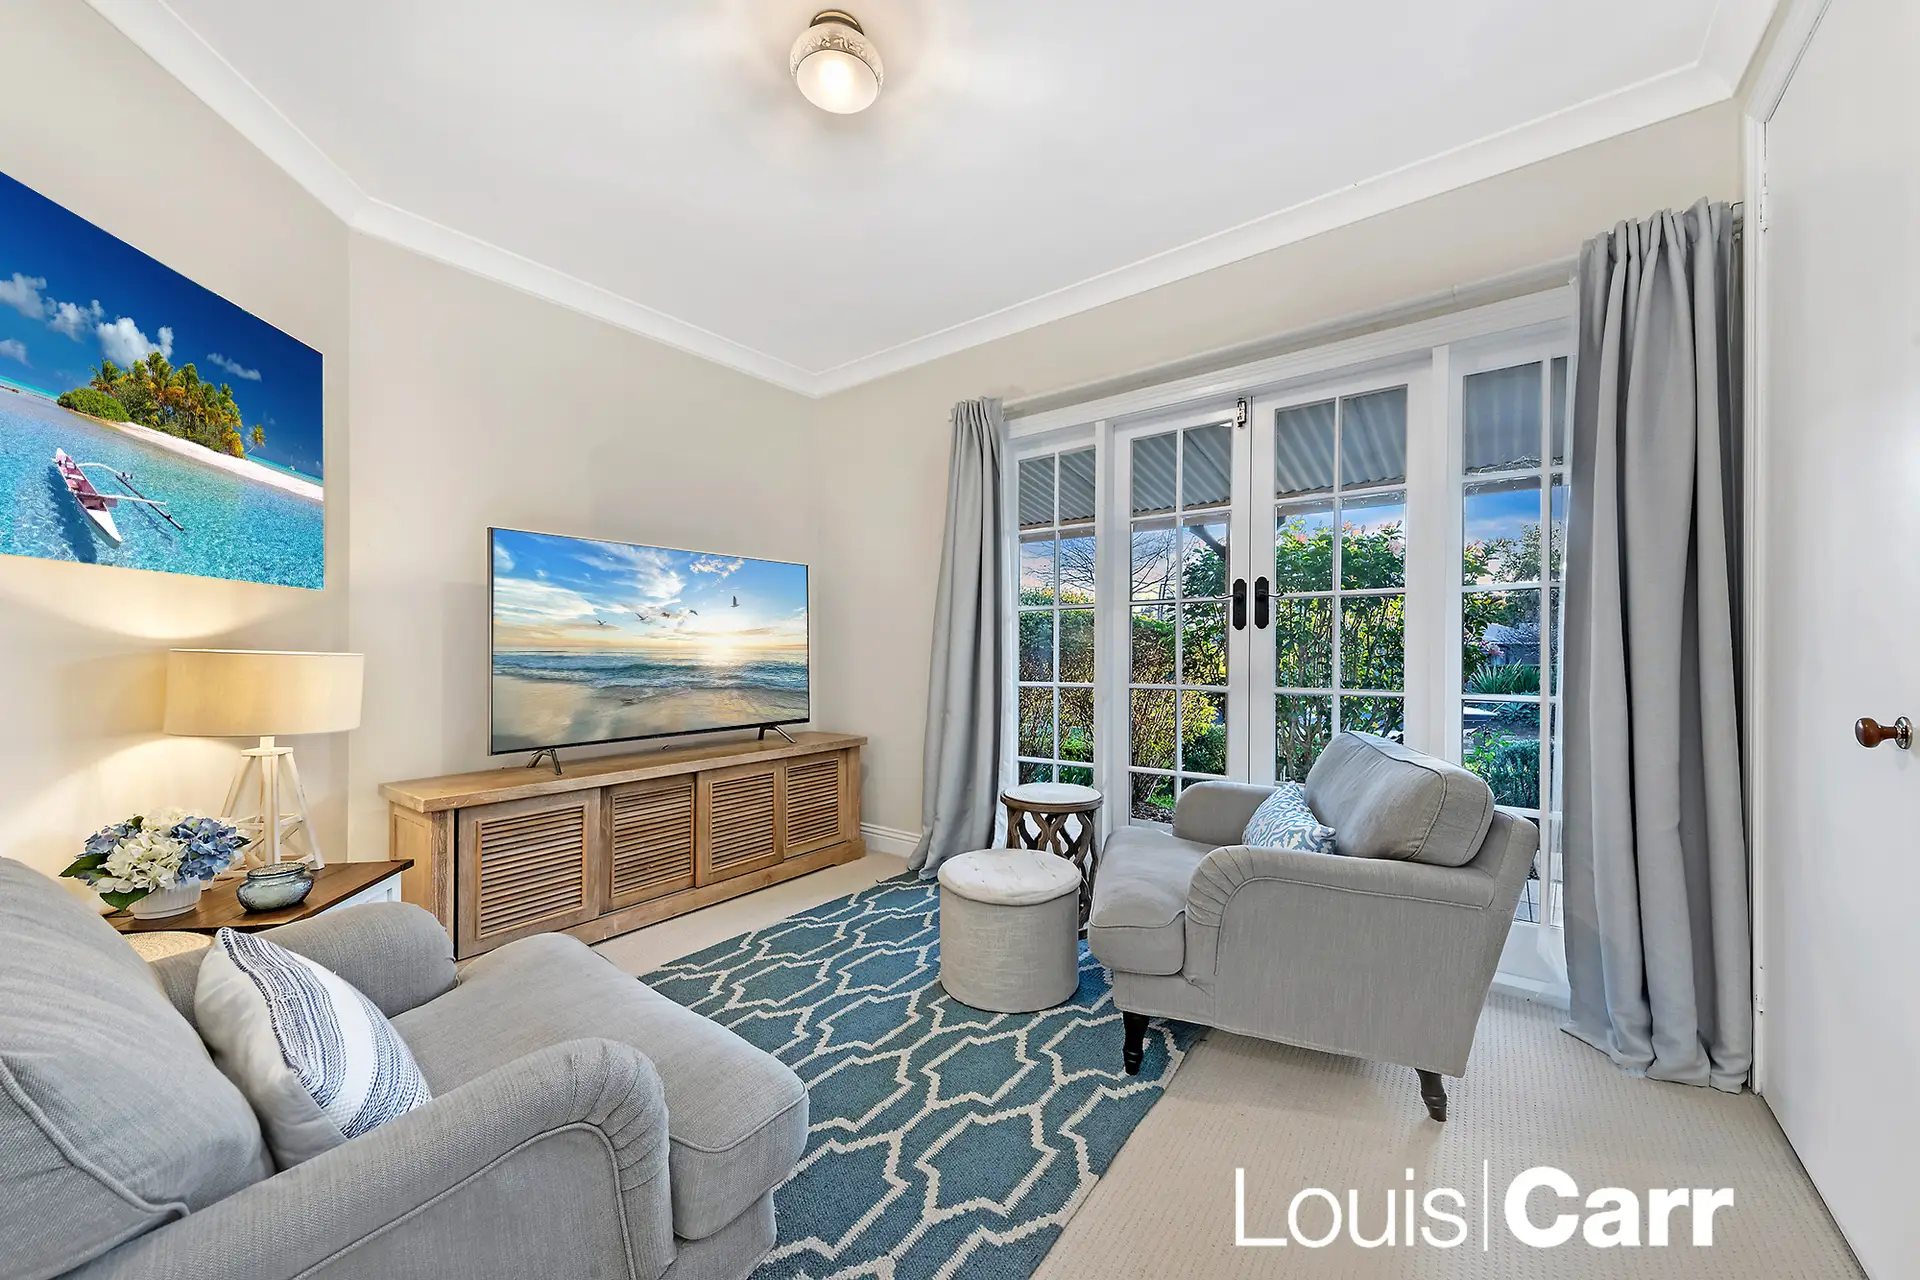 Photo #11: 32 Fullers Road, Glenhaven - Sold by Louis Carr Real Estate